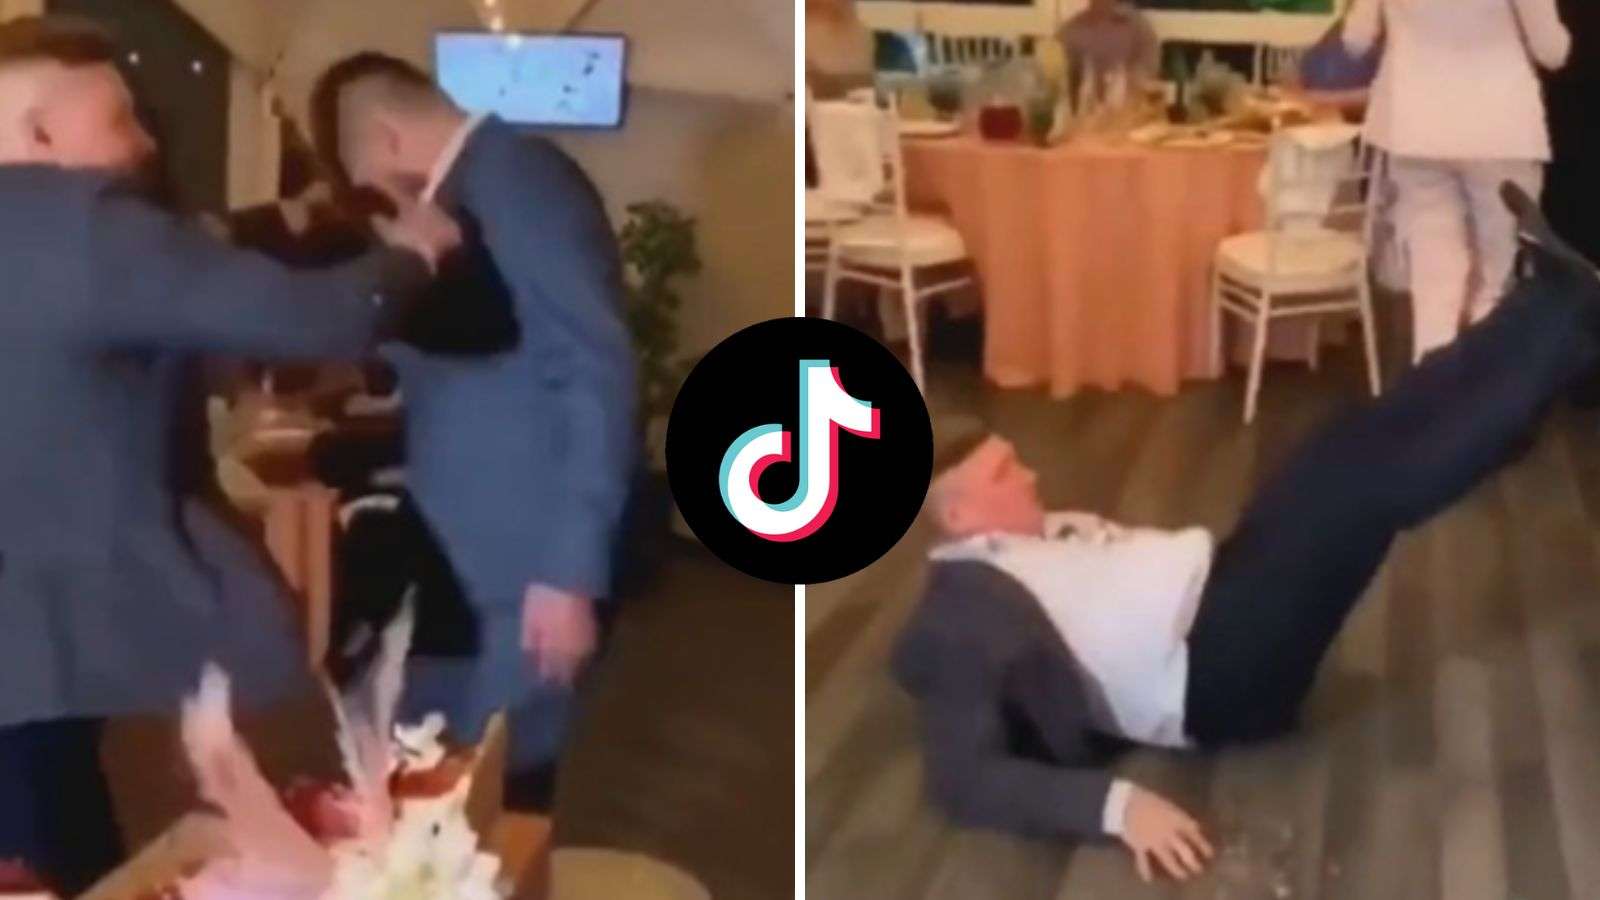 Drunk wedding guest gets punched by groom for ‘ruining’ cake in viral TikTok